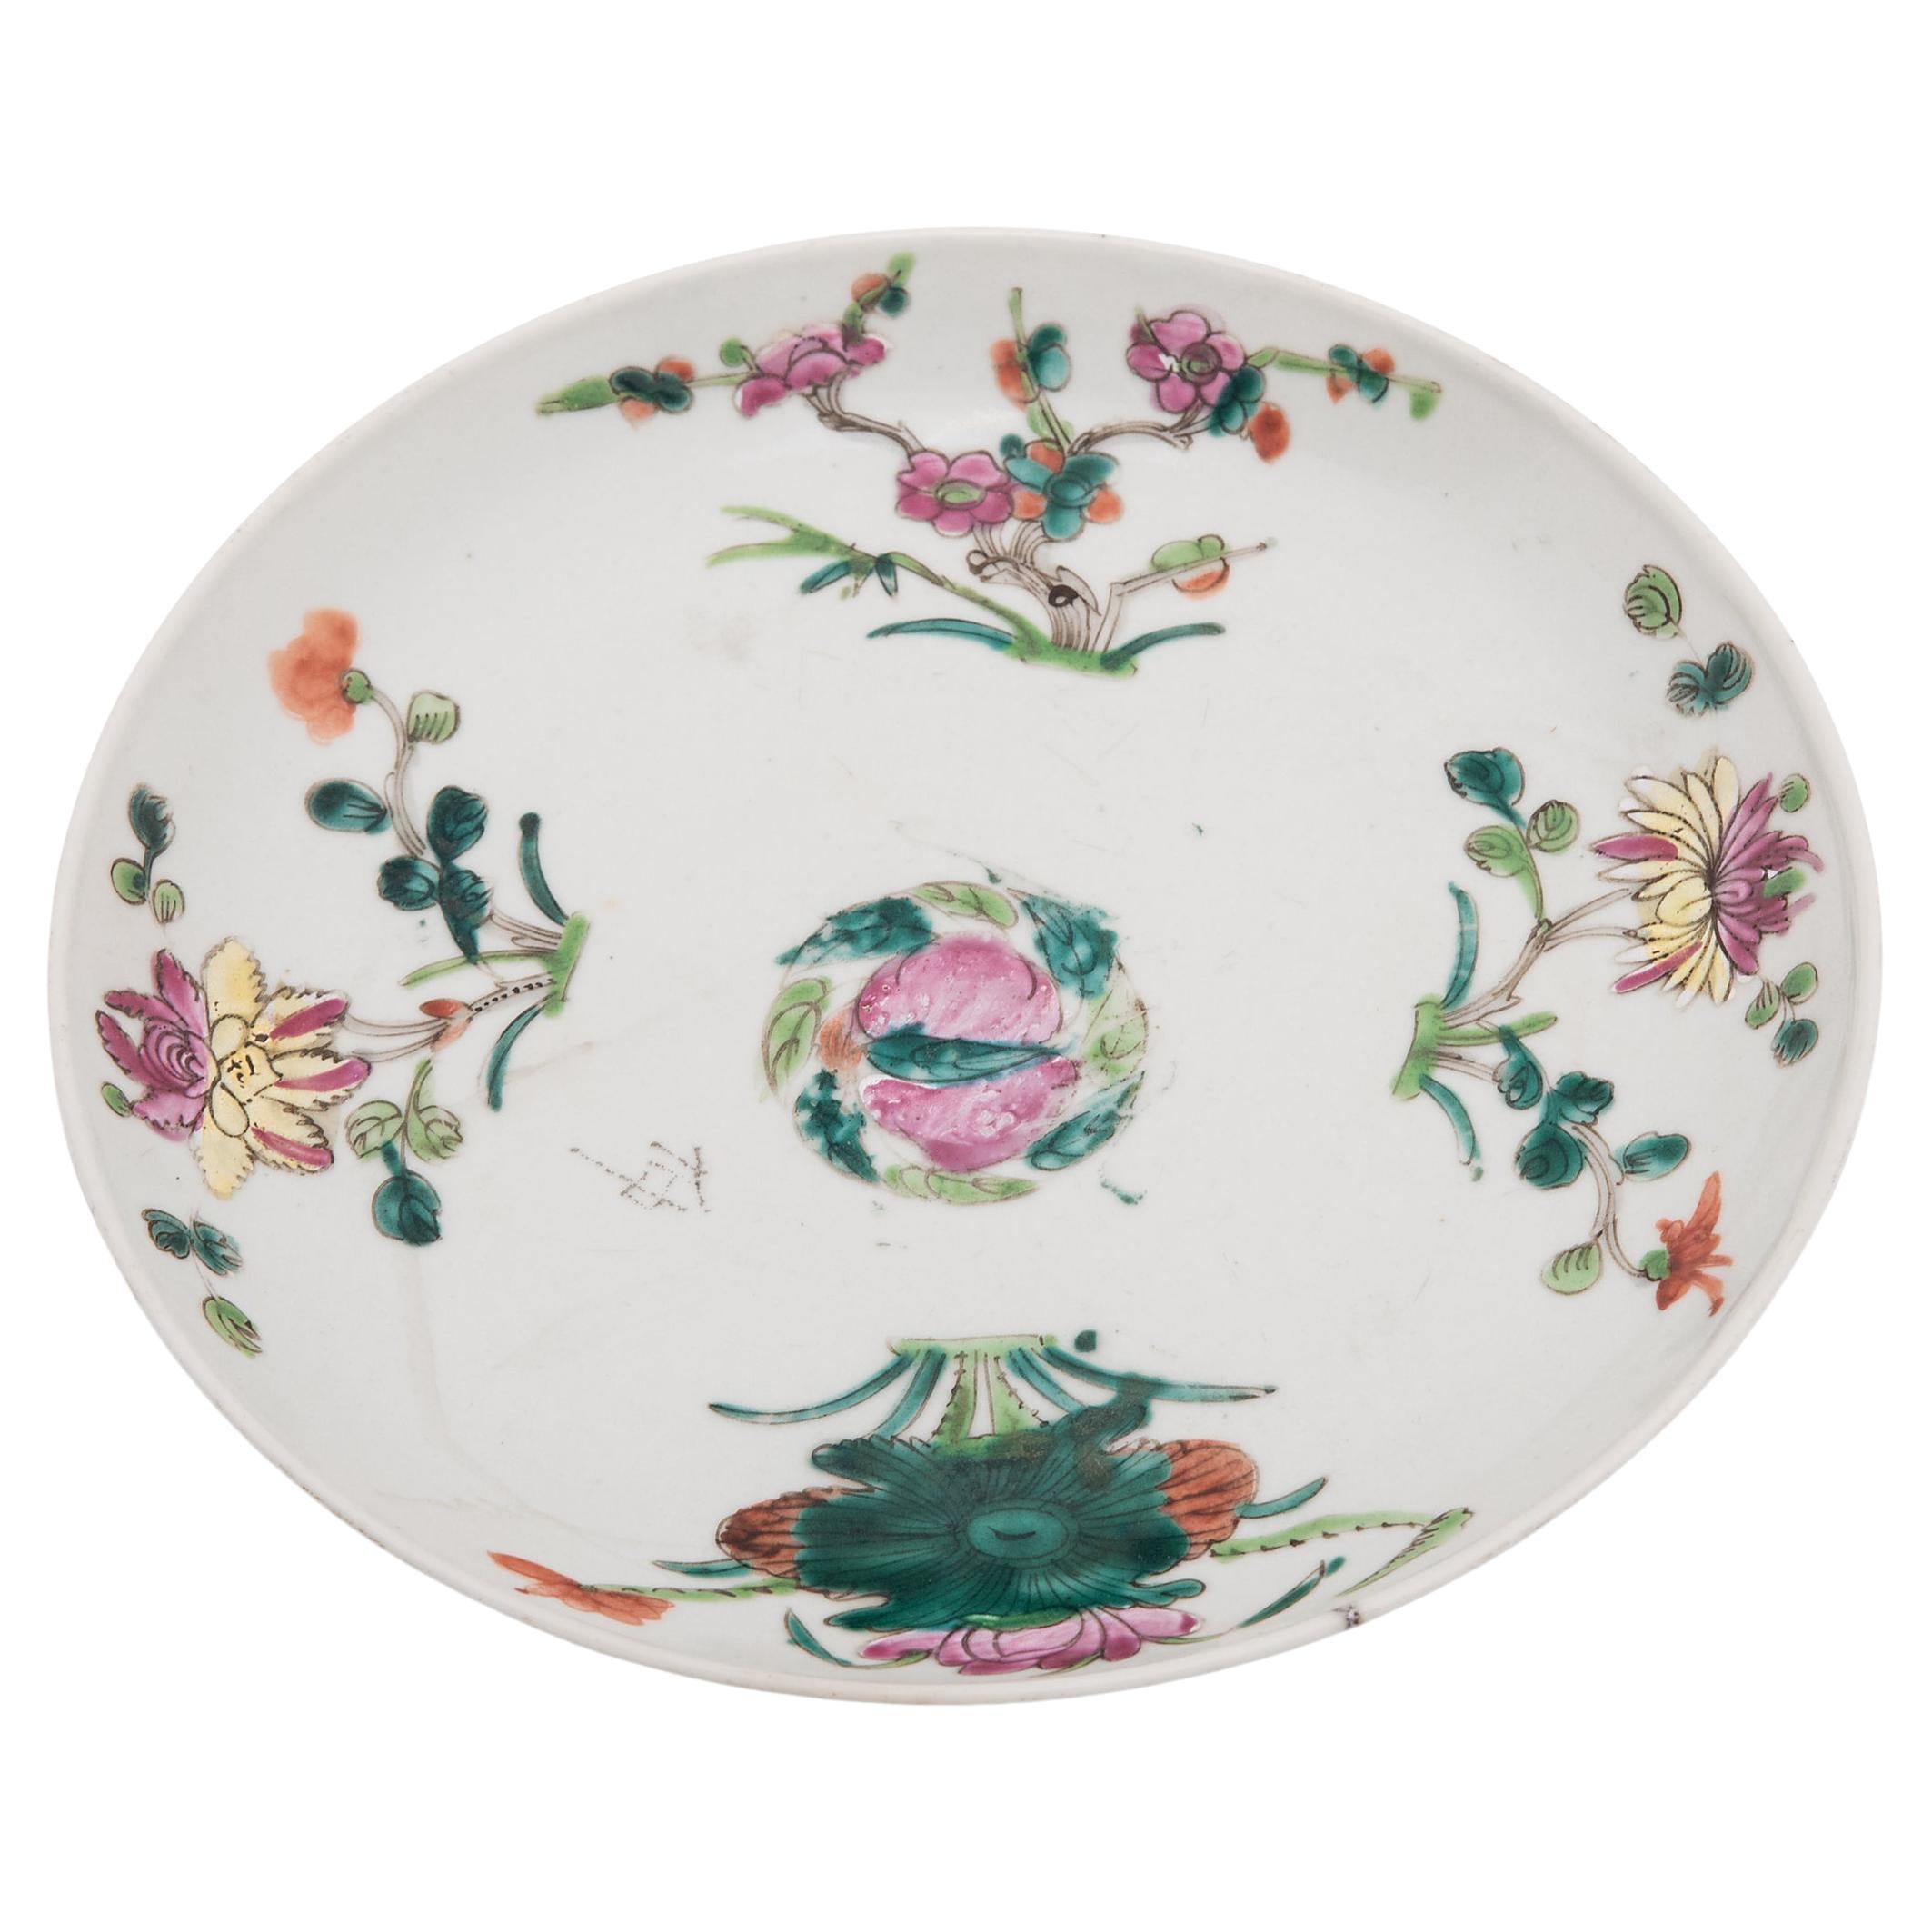 Chinese Famille Rose Four Seasons Plate, c. 1900